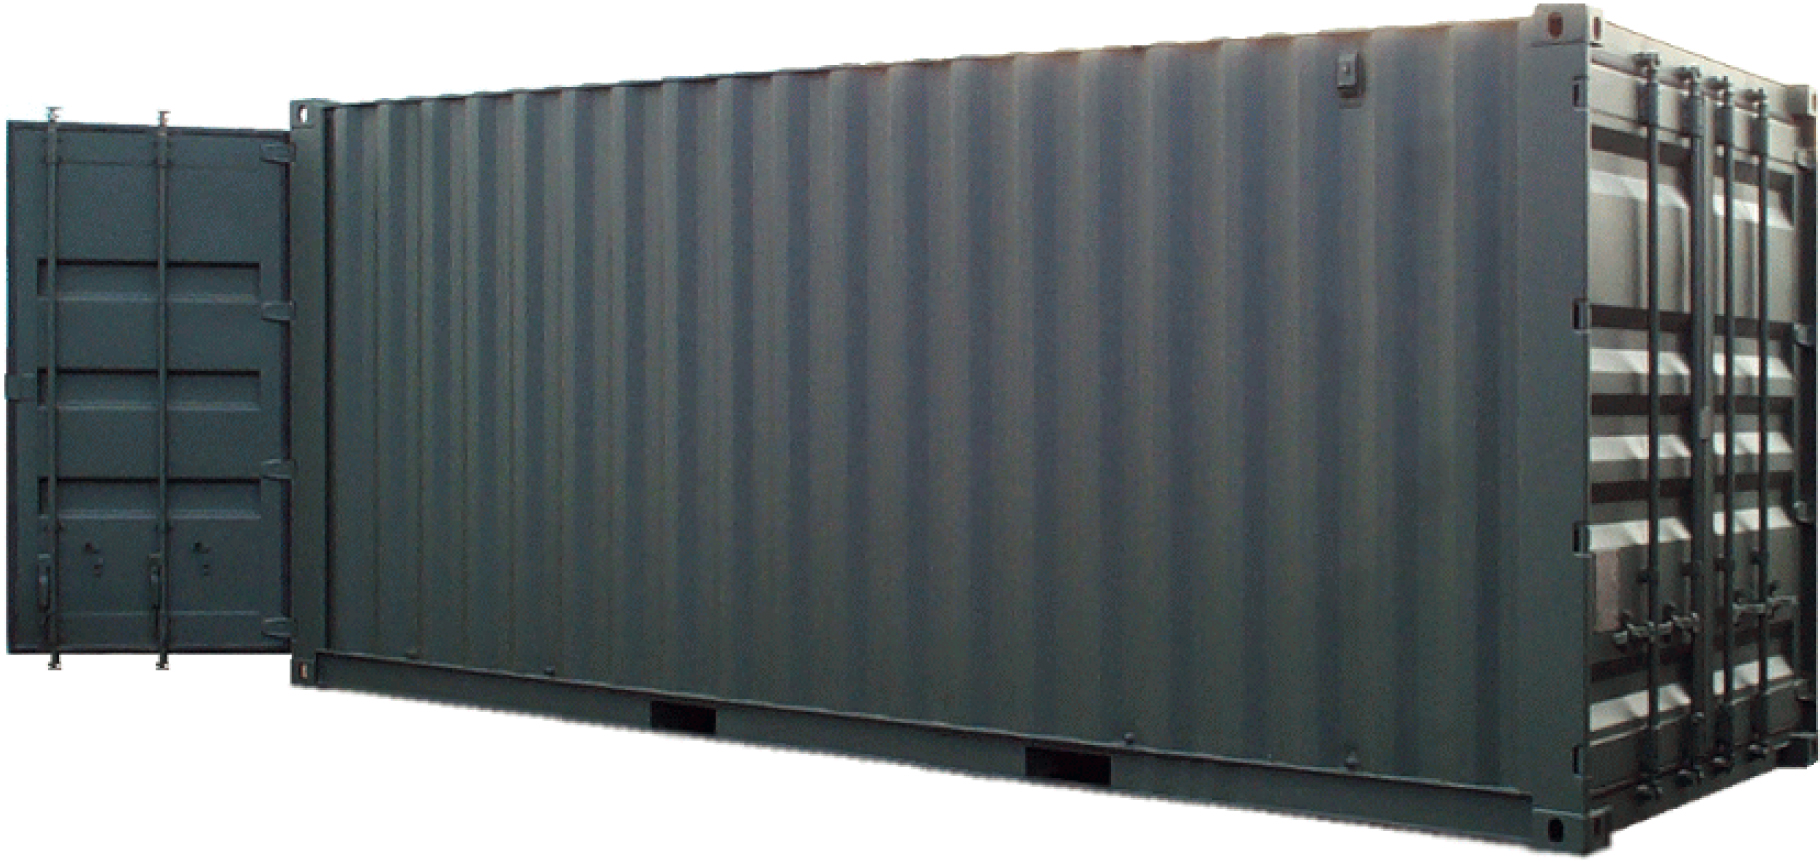 20’ x 8’6” in Dry Freight ISO Container Type 2